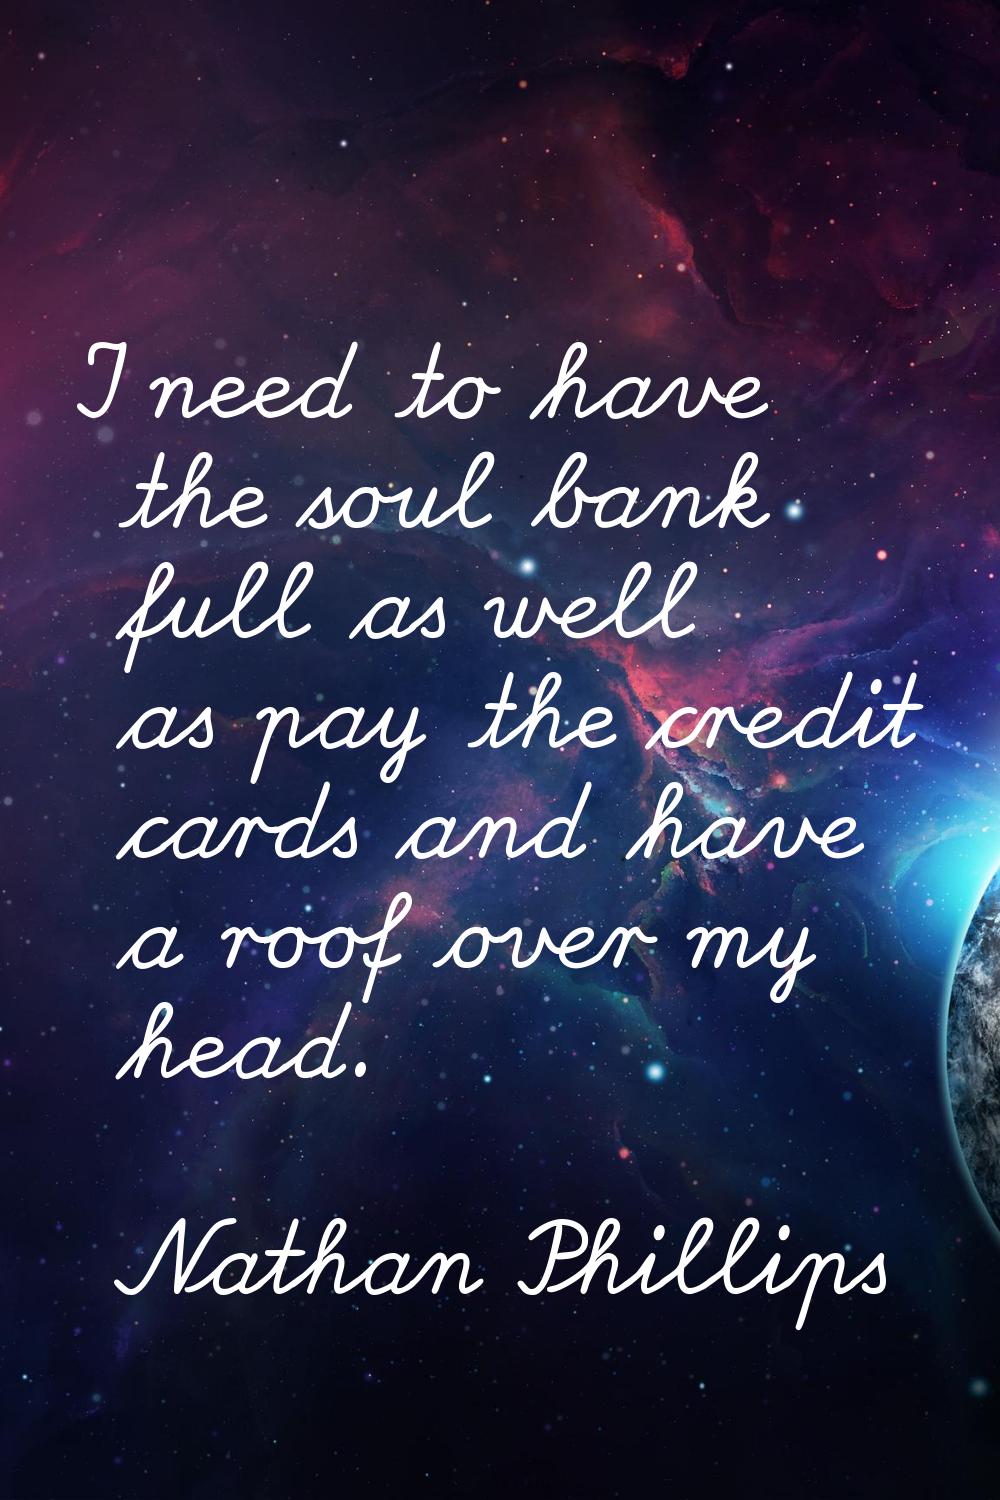 I need to have the soul bank full as well as pay the credit cards and have a roof over my head.